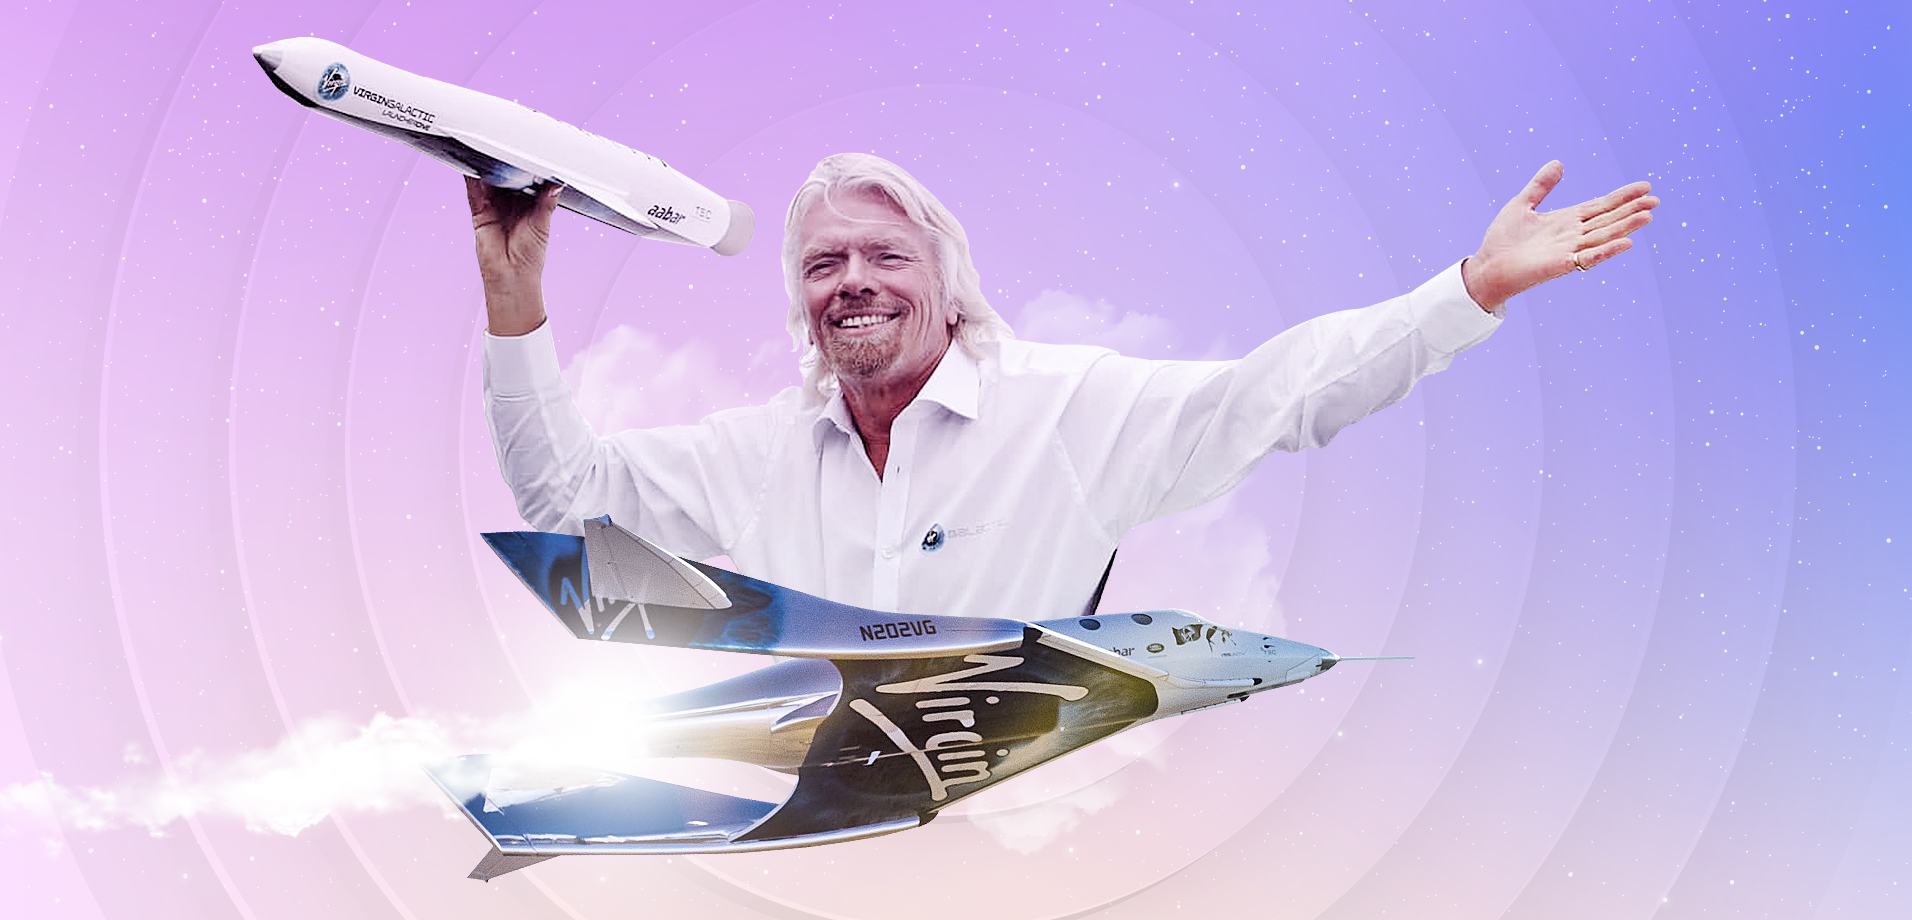 Galactic 01: First Commercial Flight Completed. So, Why Are Virgin Galactic’s Stocks Falling?